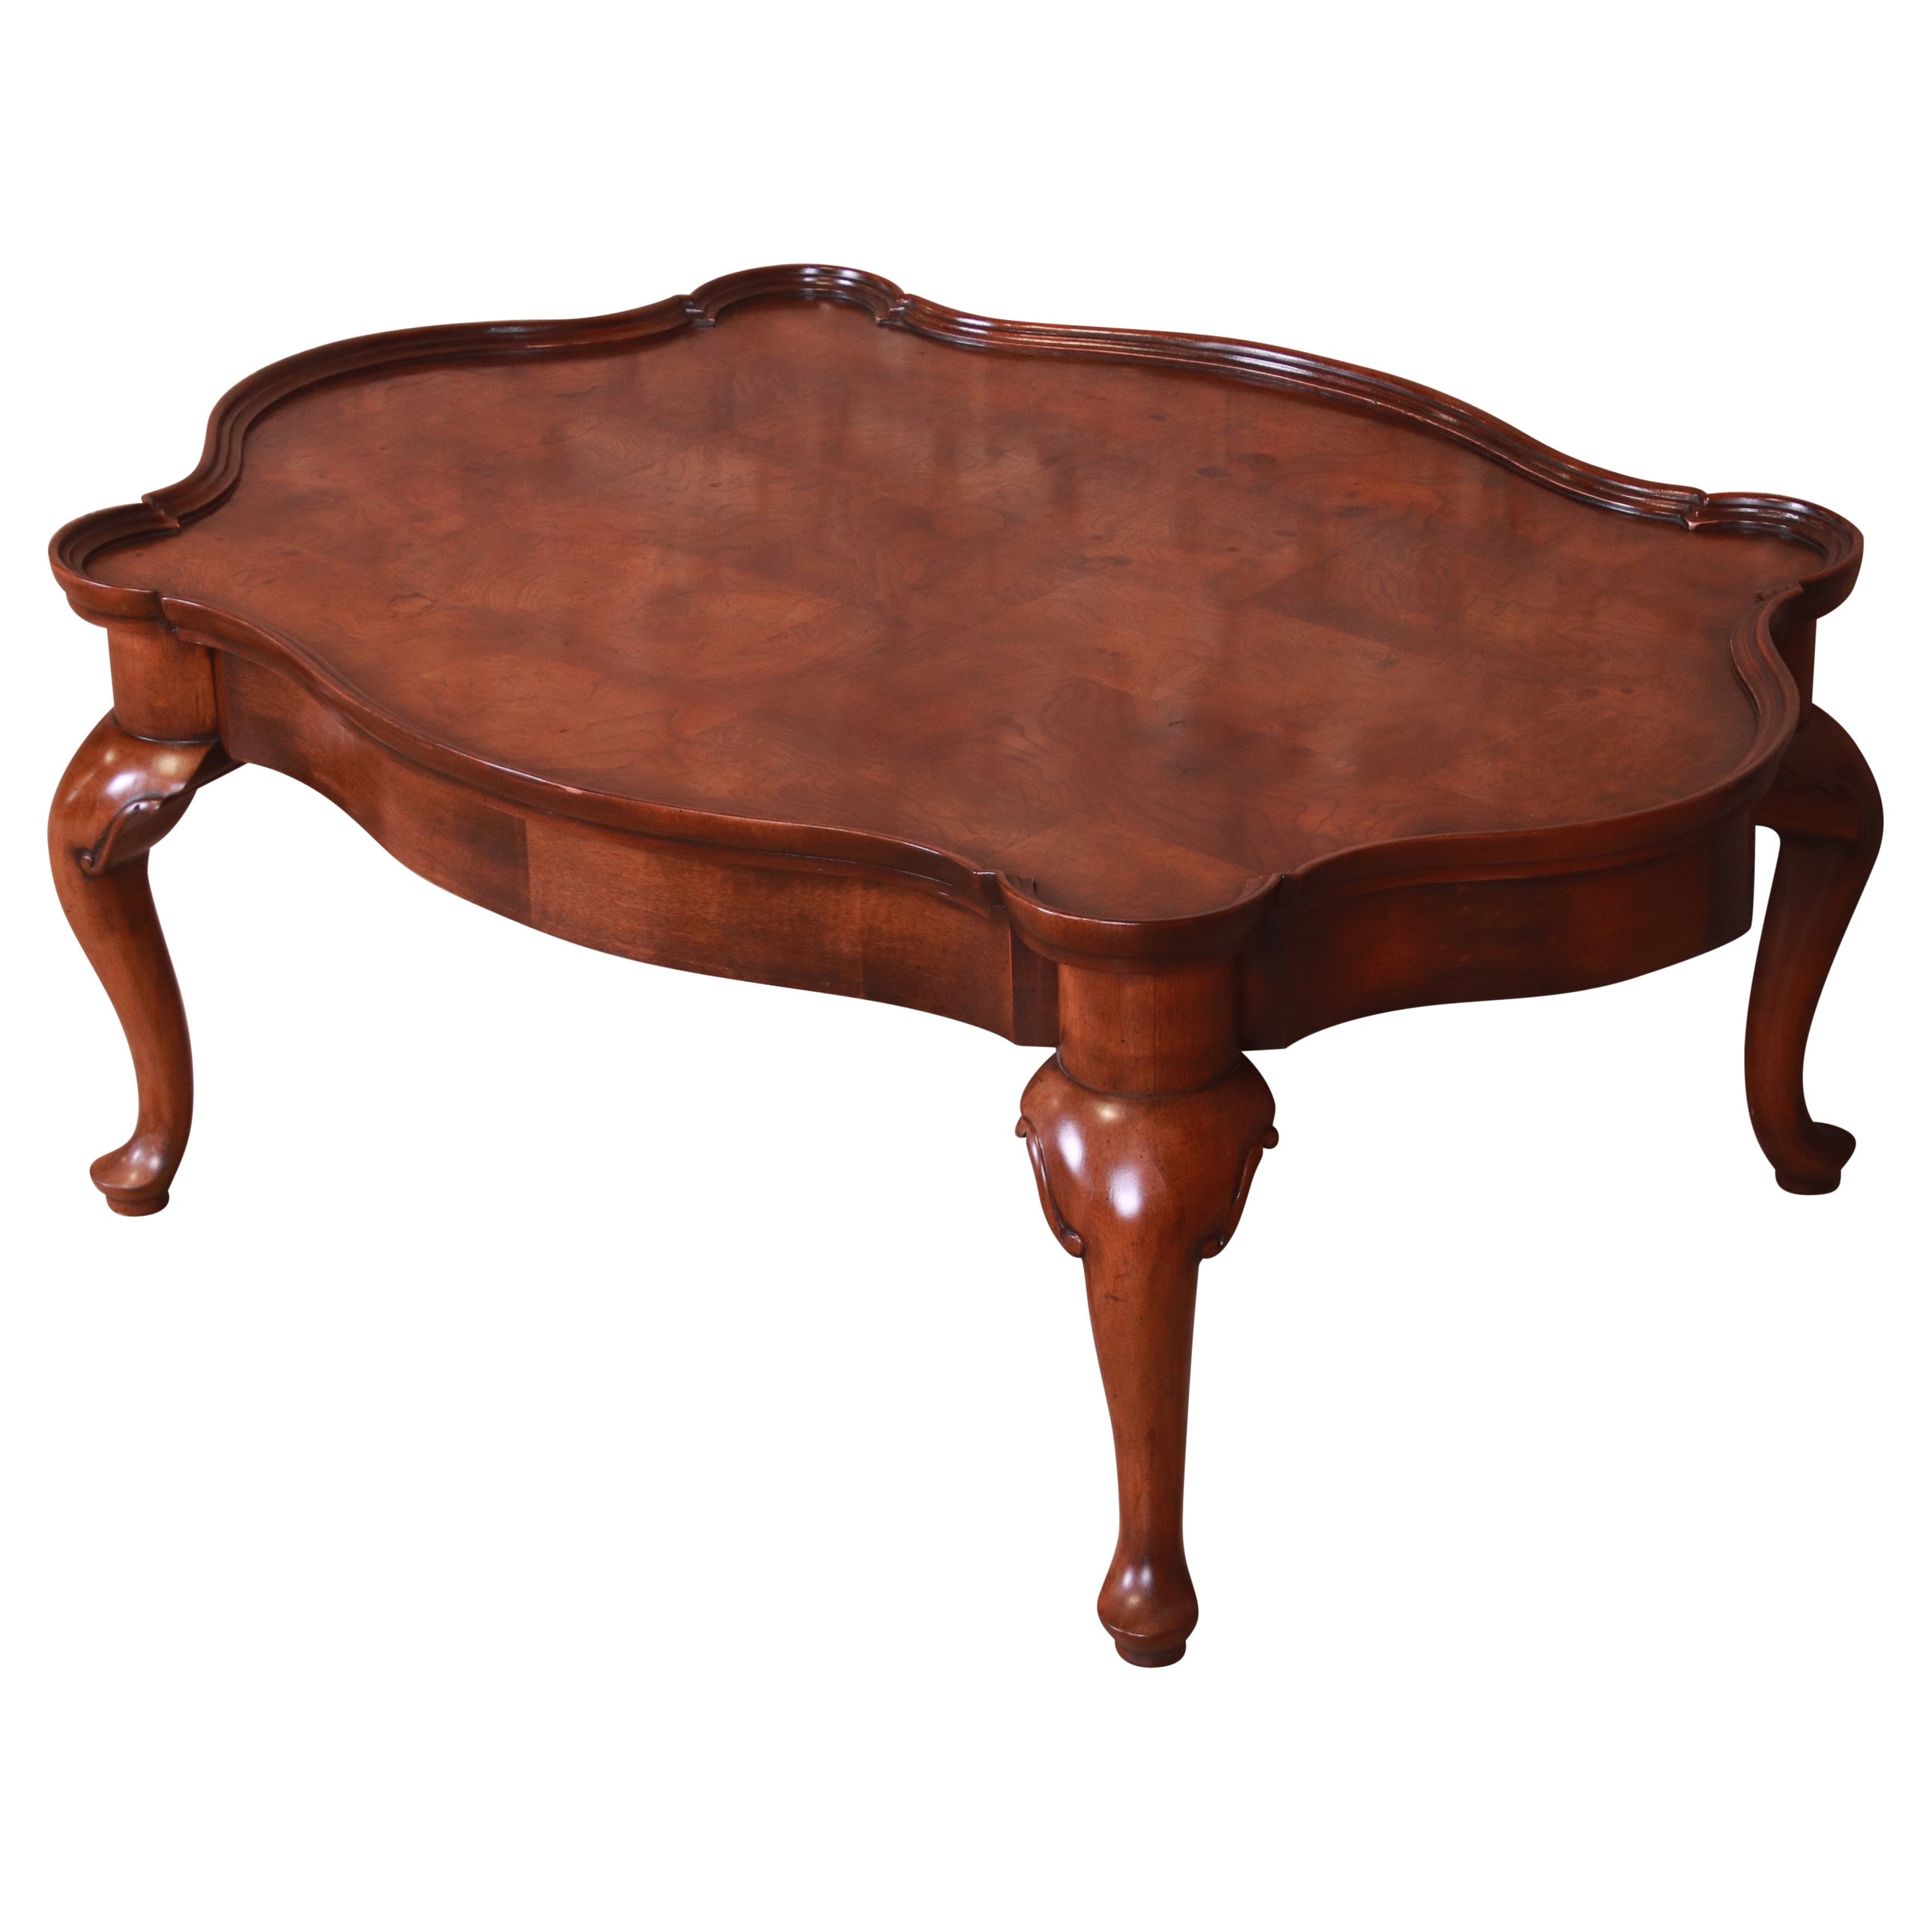 French Provincial Mahogany and Burl Coffee Table Attributed to Baker Furniture